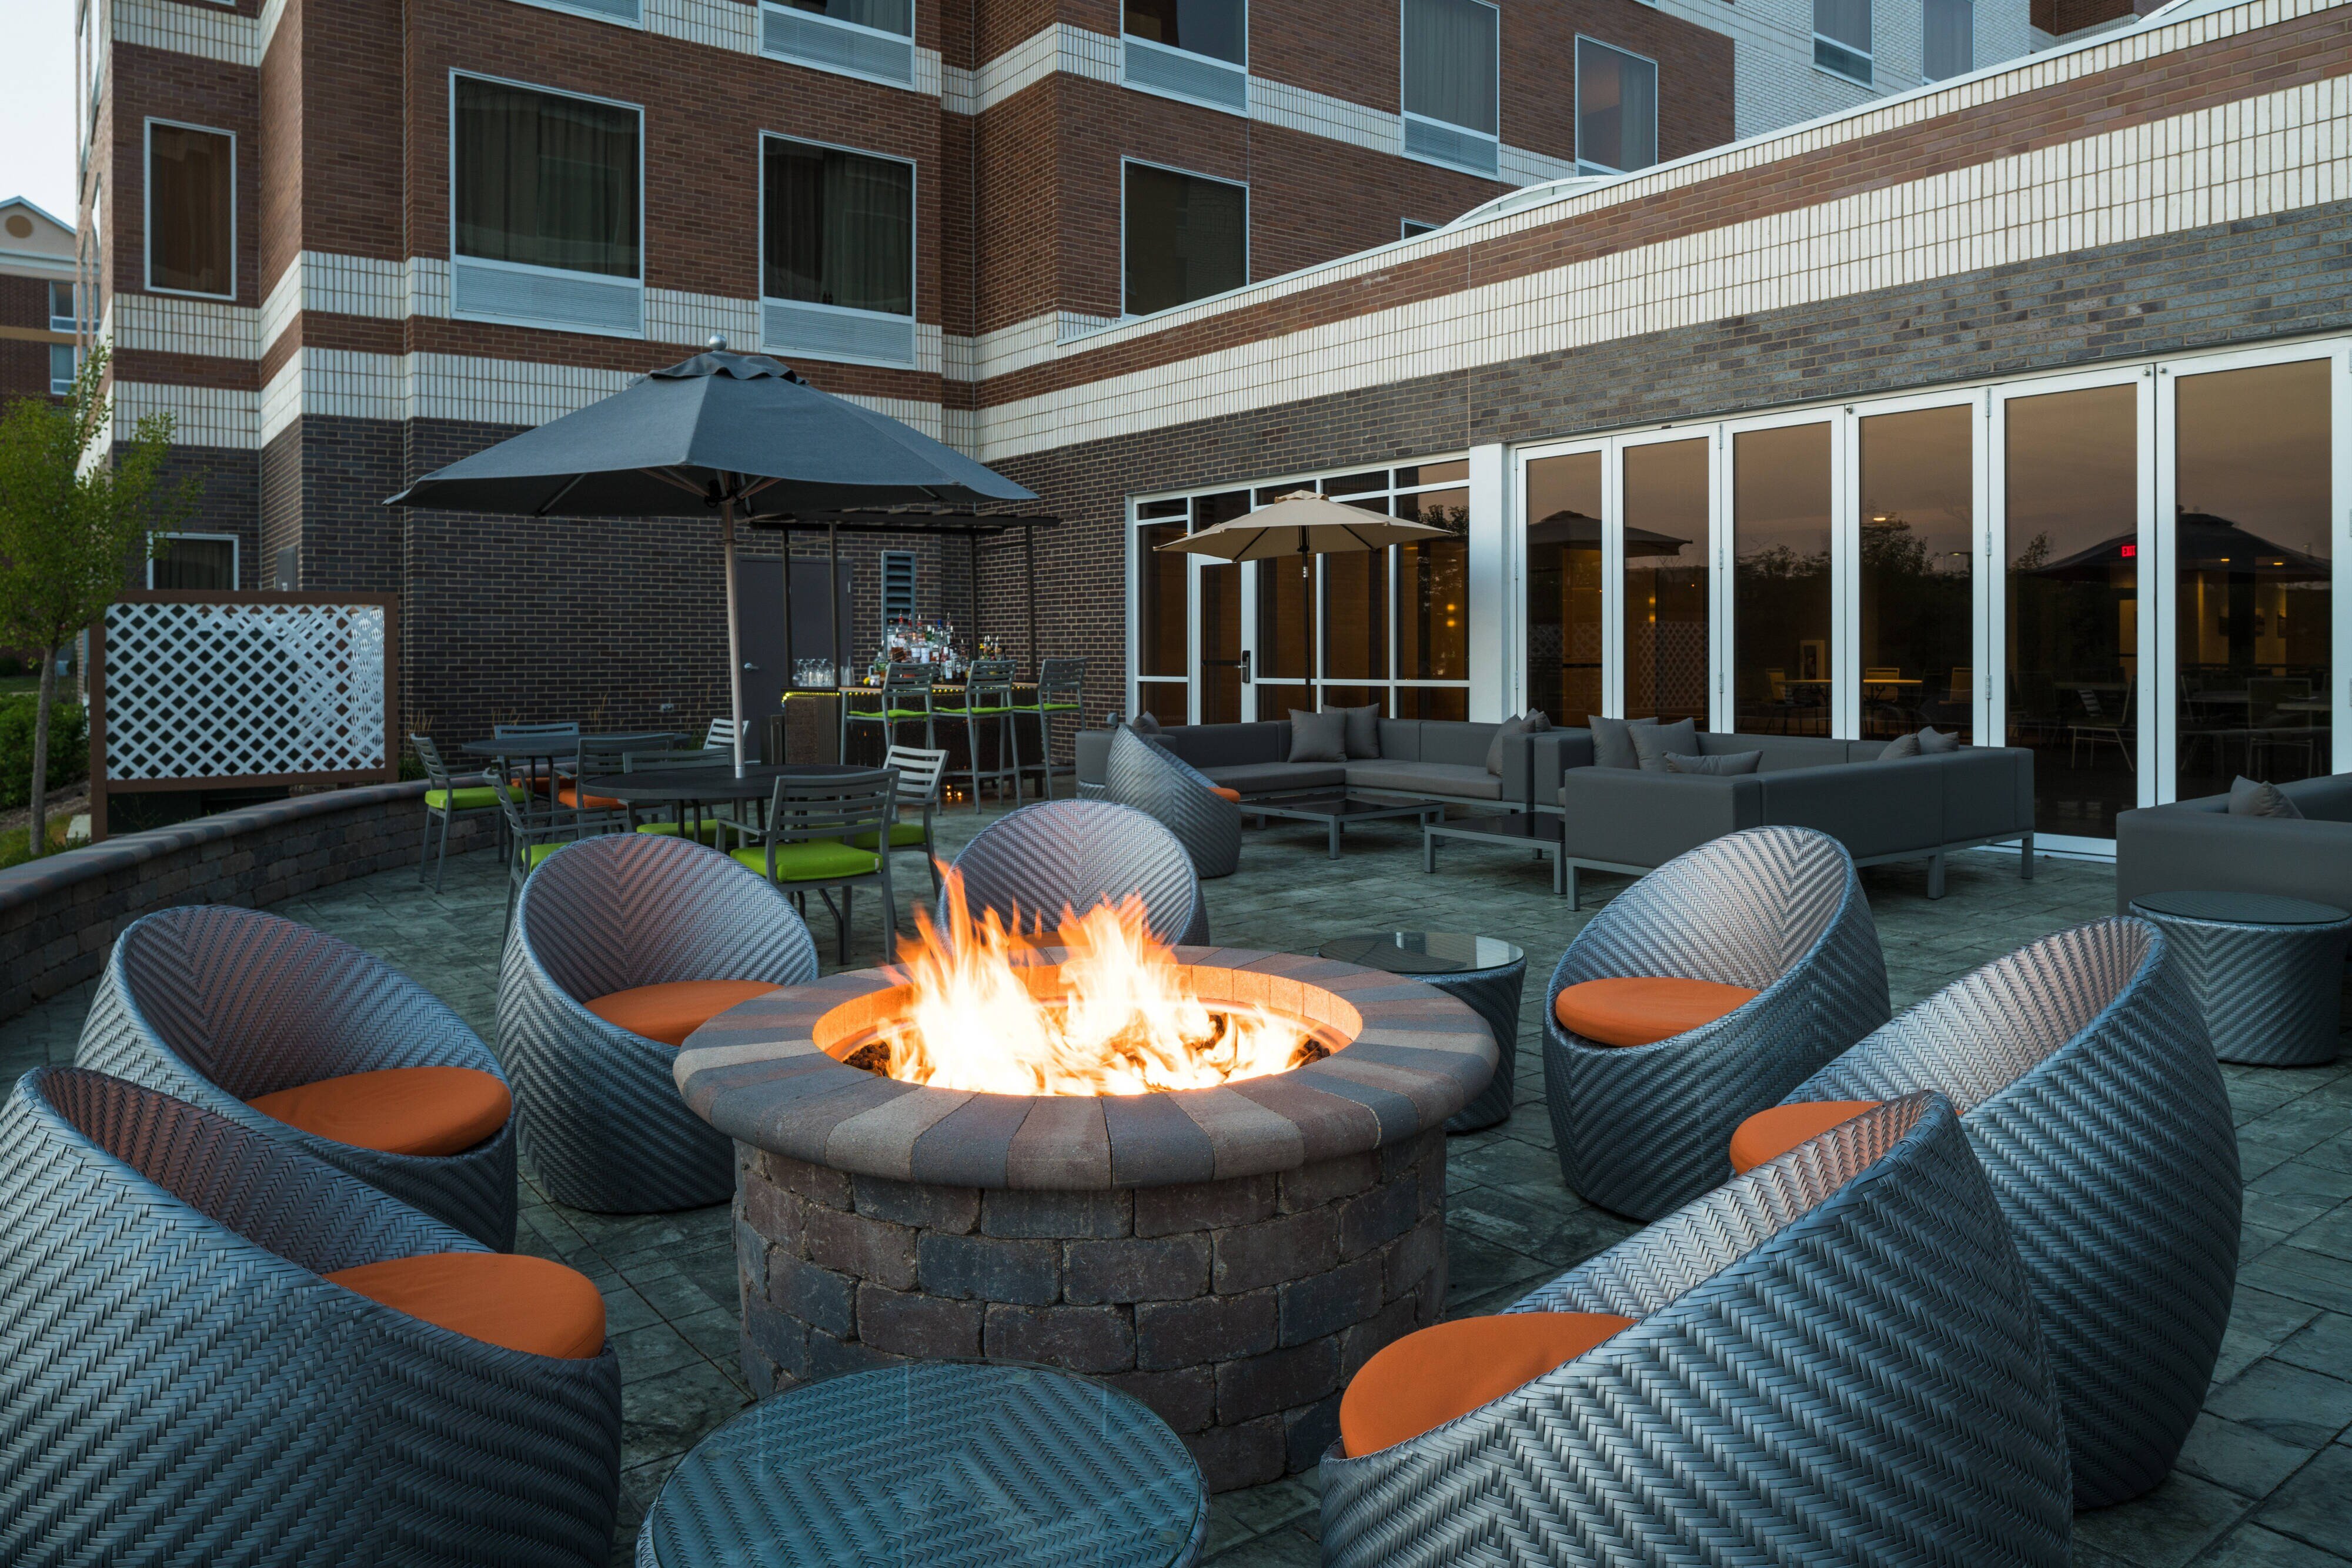 Firepit at the Outdoor Patio